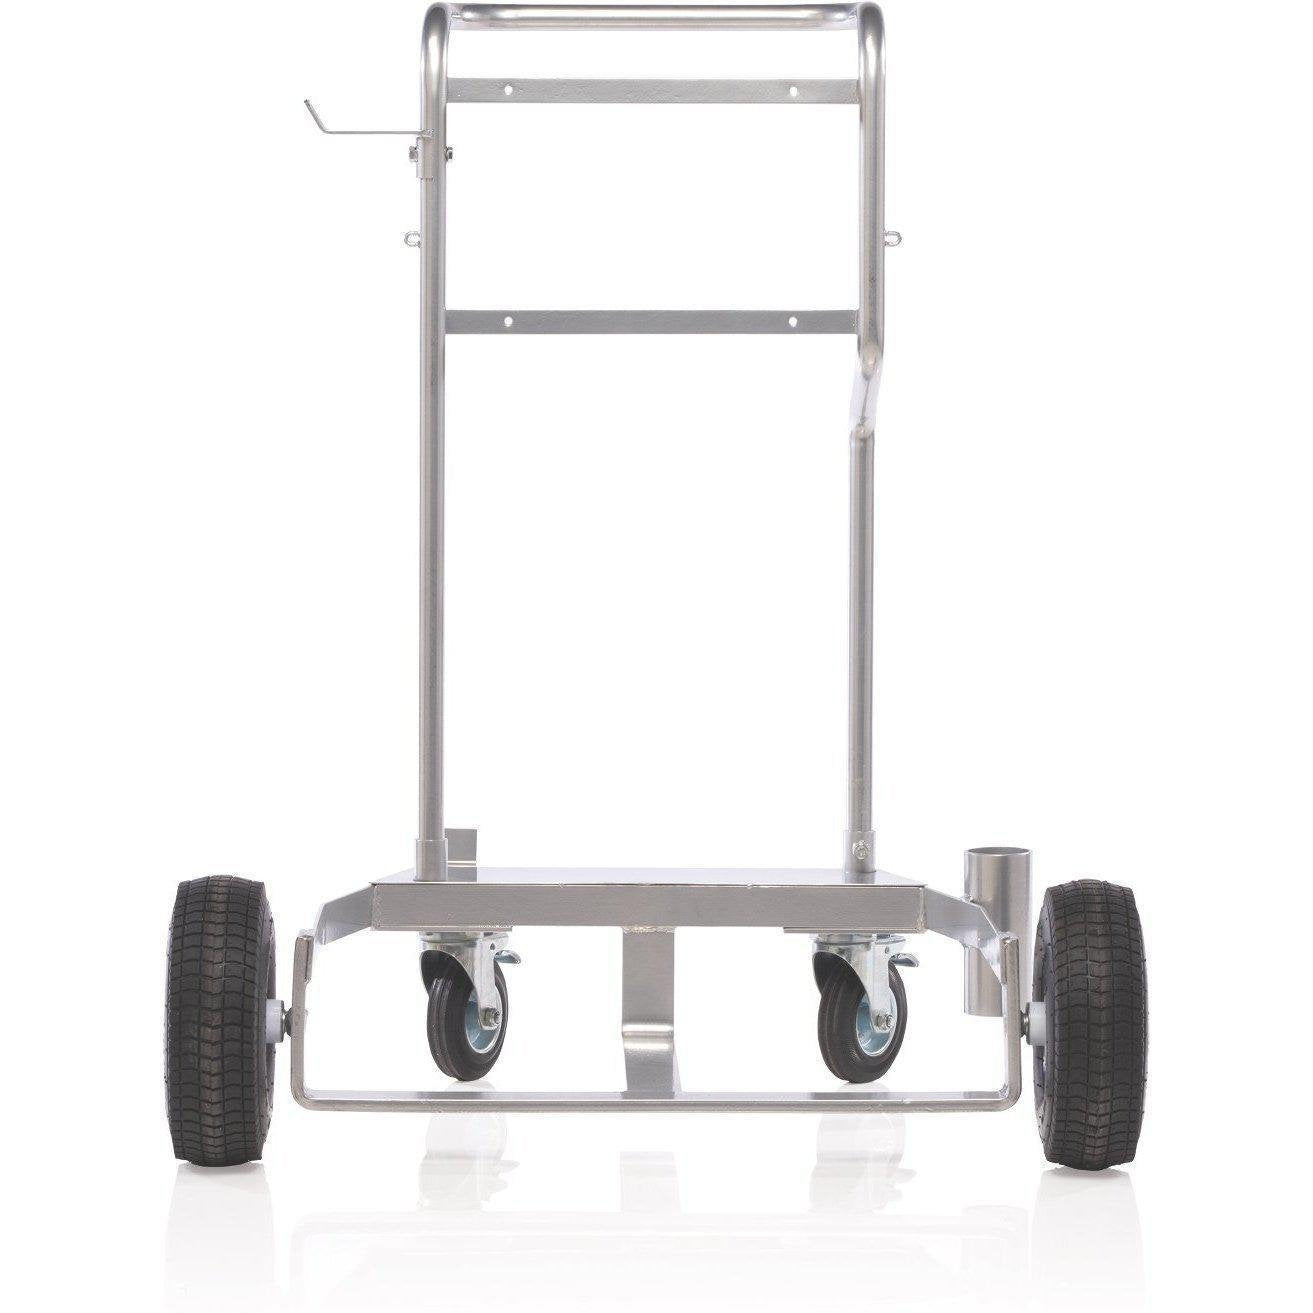 24F915-Graco 24F915 Ld Series 50:1 Grease Pump Drum Cart With Pneumatic Wheels For 400 Lb. Drums, Includes Chain For Securing Drum To Cart-Order-Online-Fireball-Equipment